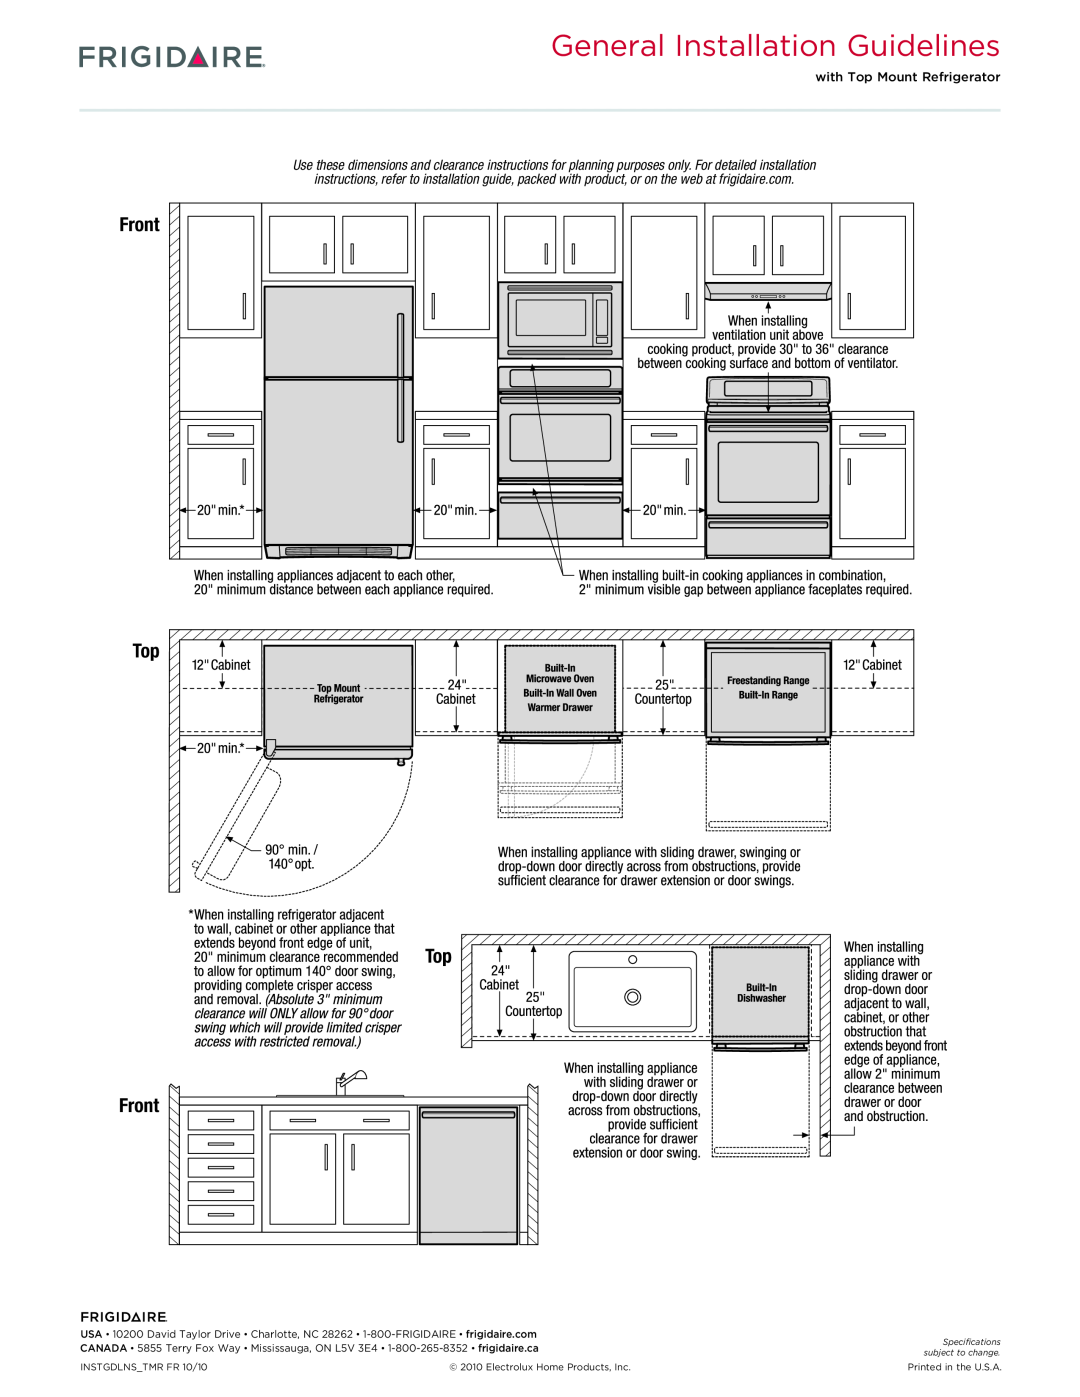 Frigidaire FFES3005L General Installation Guidelines, Top Front, with Top Mount Refrigerator, INSTGDLNS_TMR FR 10/10 